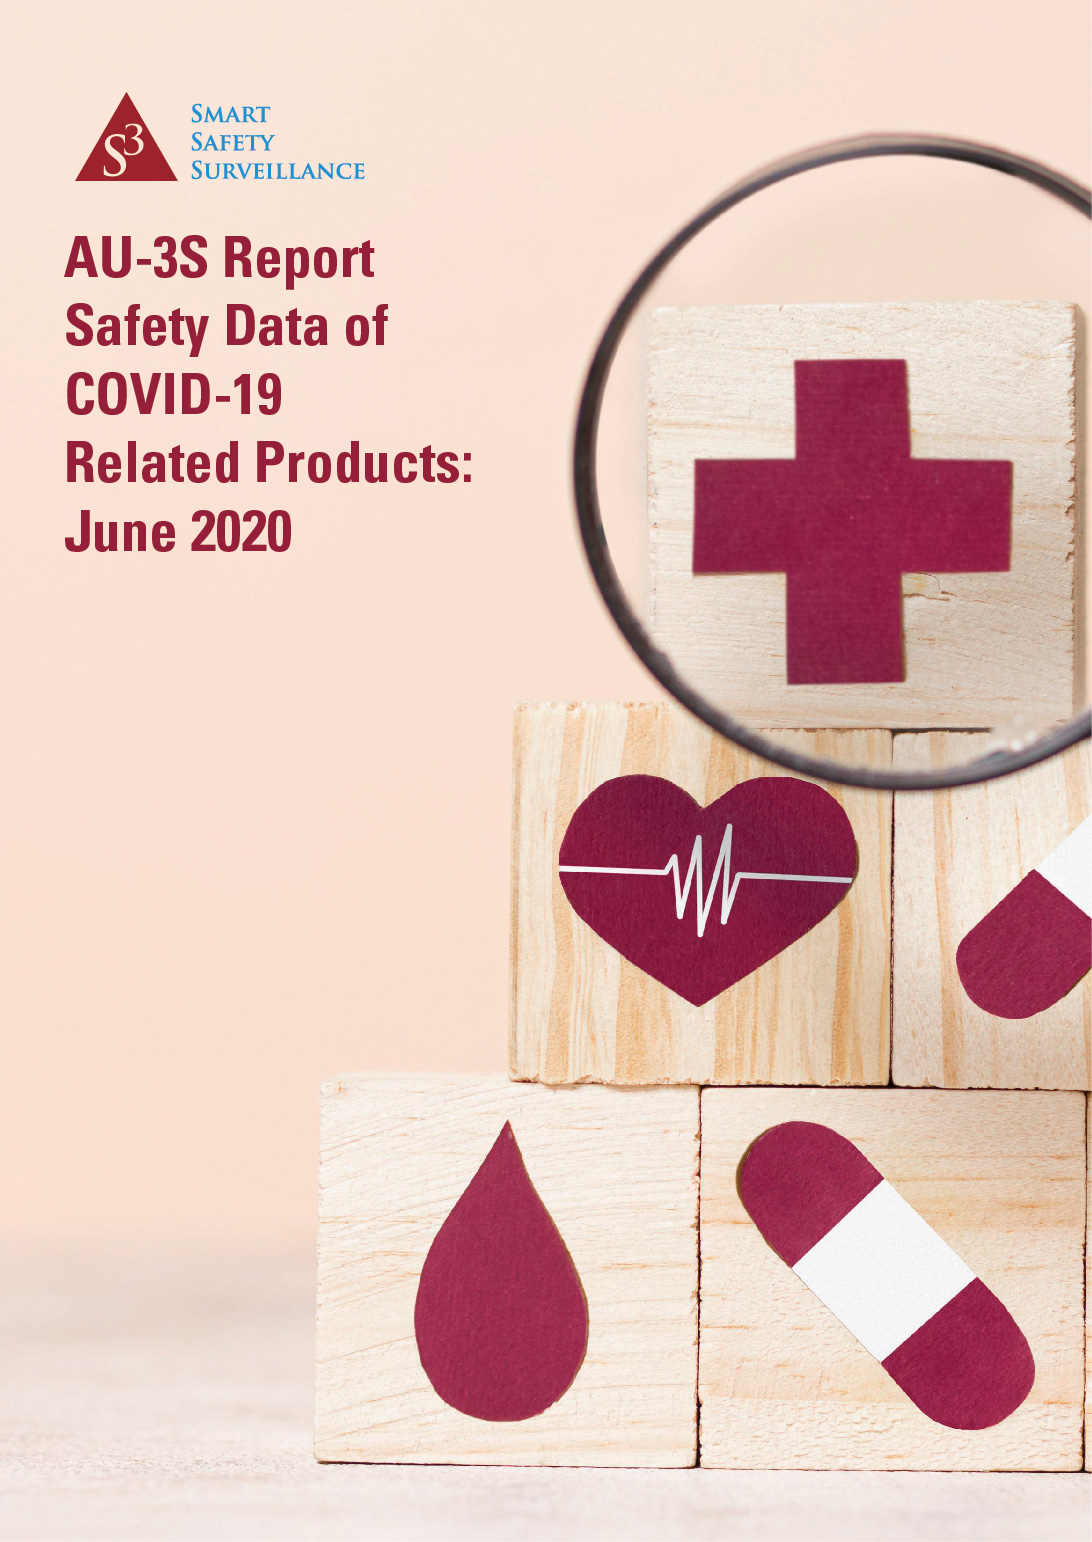 Report: AU-3S Africa focused Report on Safety Data of COVID-19 related Products: June 2020